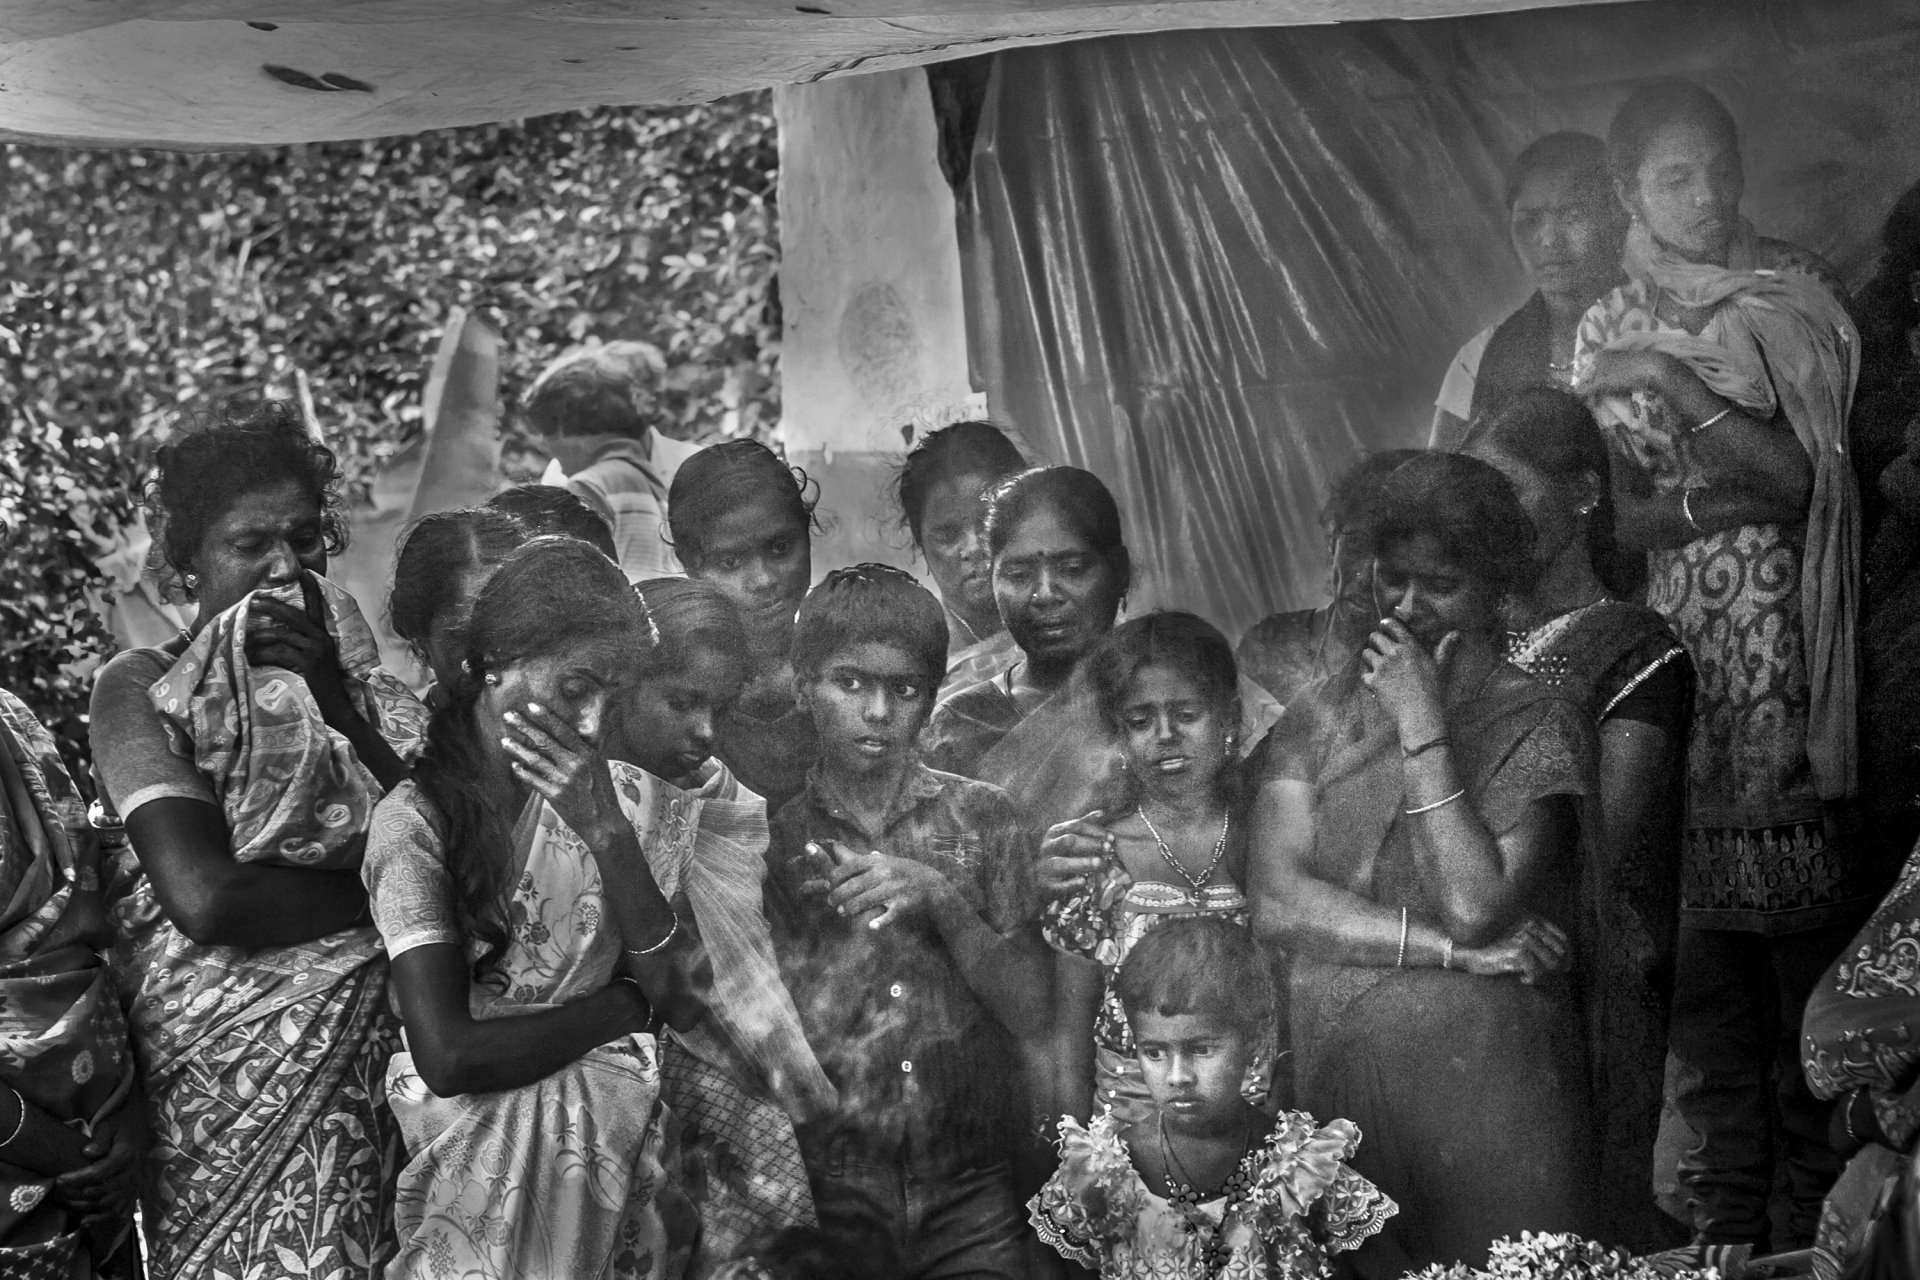 <p>Neighbors in the village of Pattavayal mourn the death of a 38-year-old woman who was killed by a tiger while she was working on the tea estate near Mudumalai Tiger Reserve, Gudalur, Tamil Nadu, India.</p>
